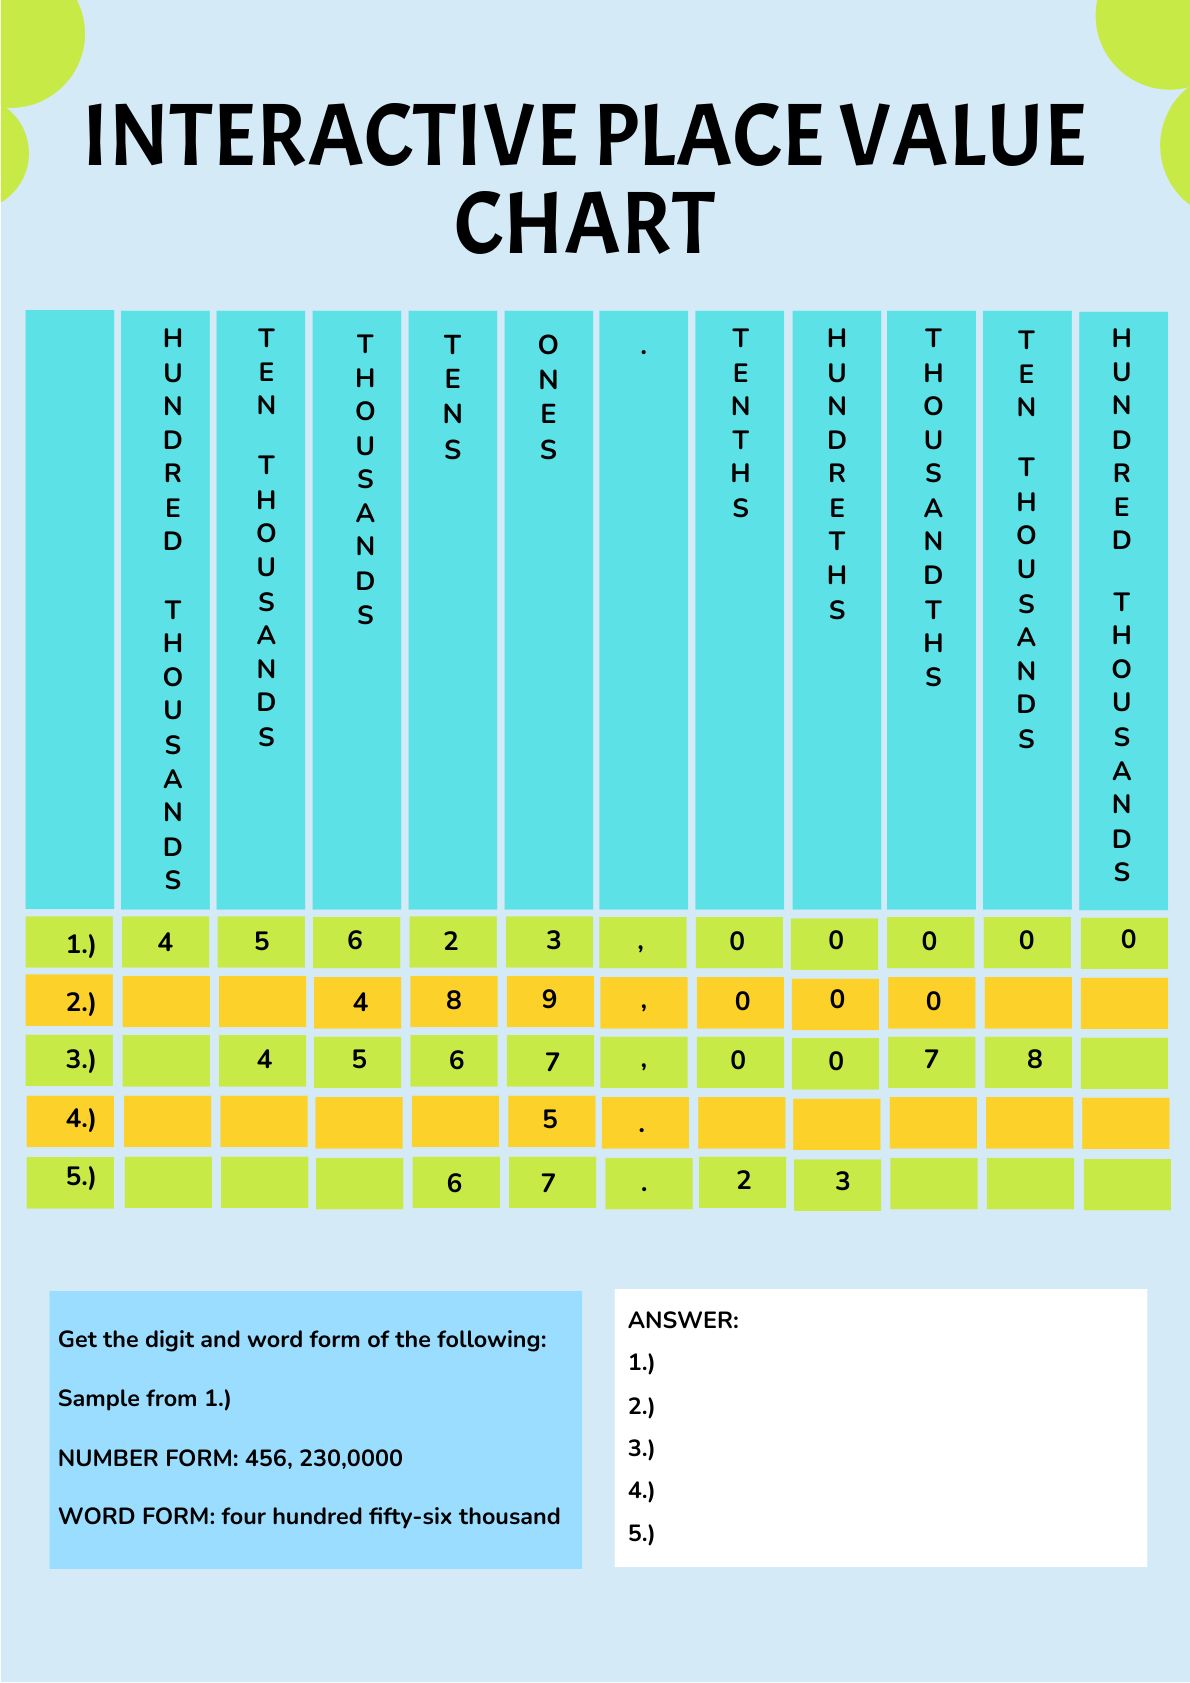 Interactive Place Value Chart in PDF, Illustrator